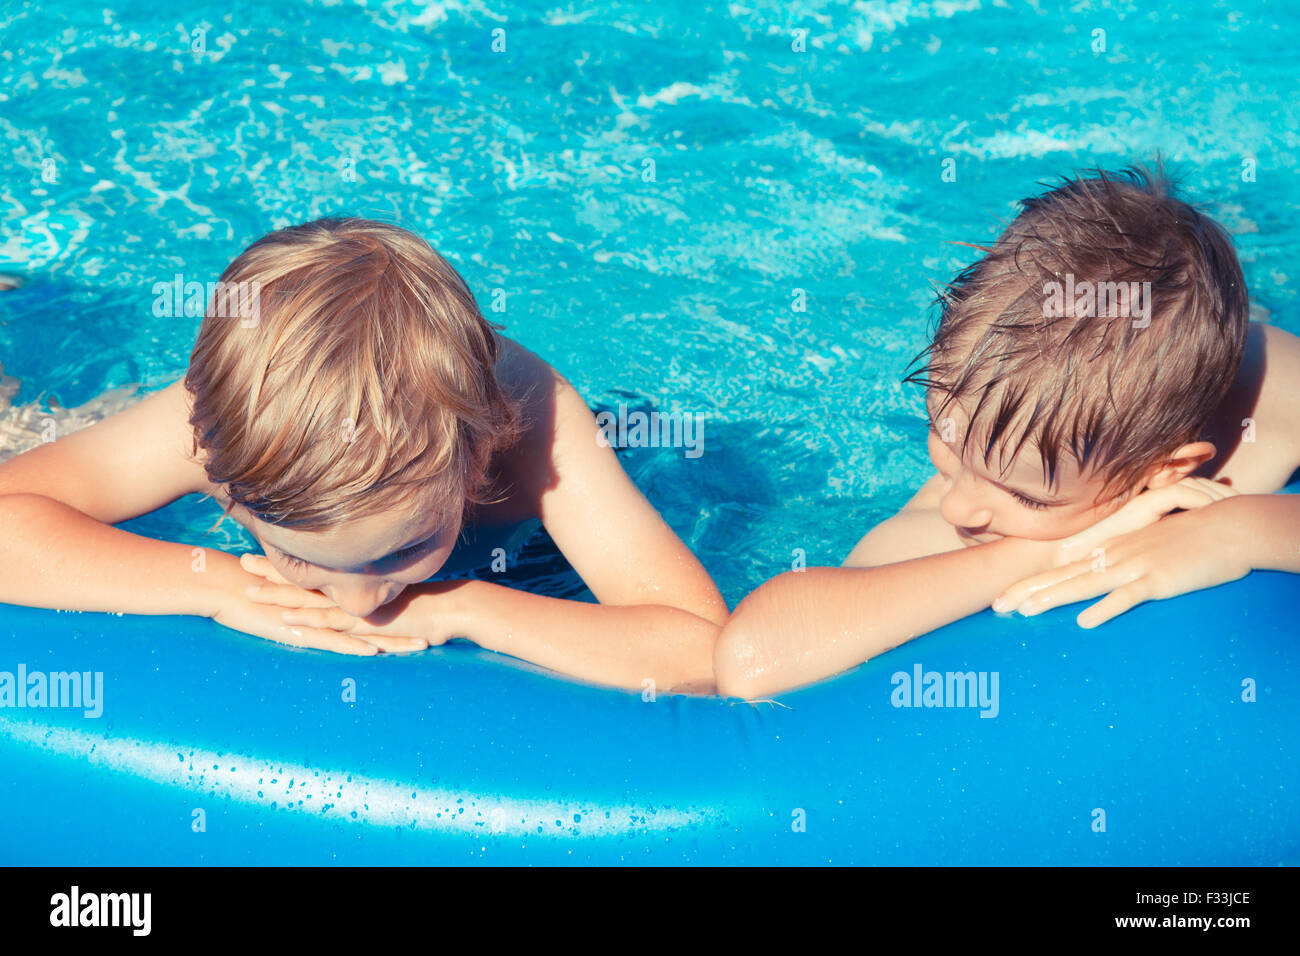 Two young boys outdoors playing in inflatable pool. Stock Photo